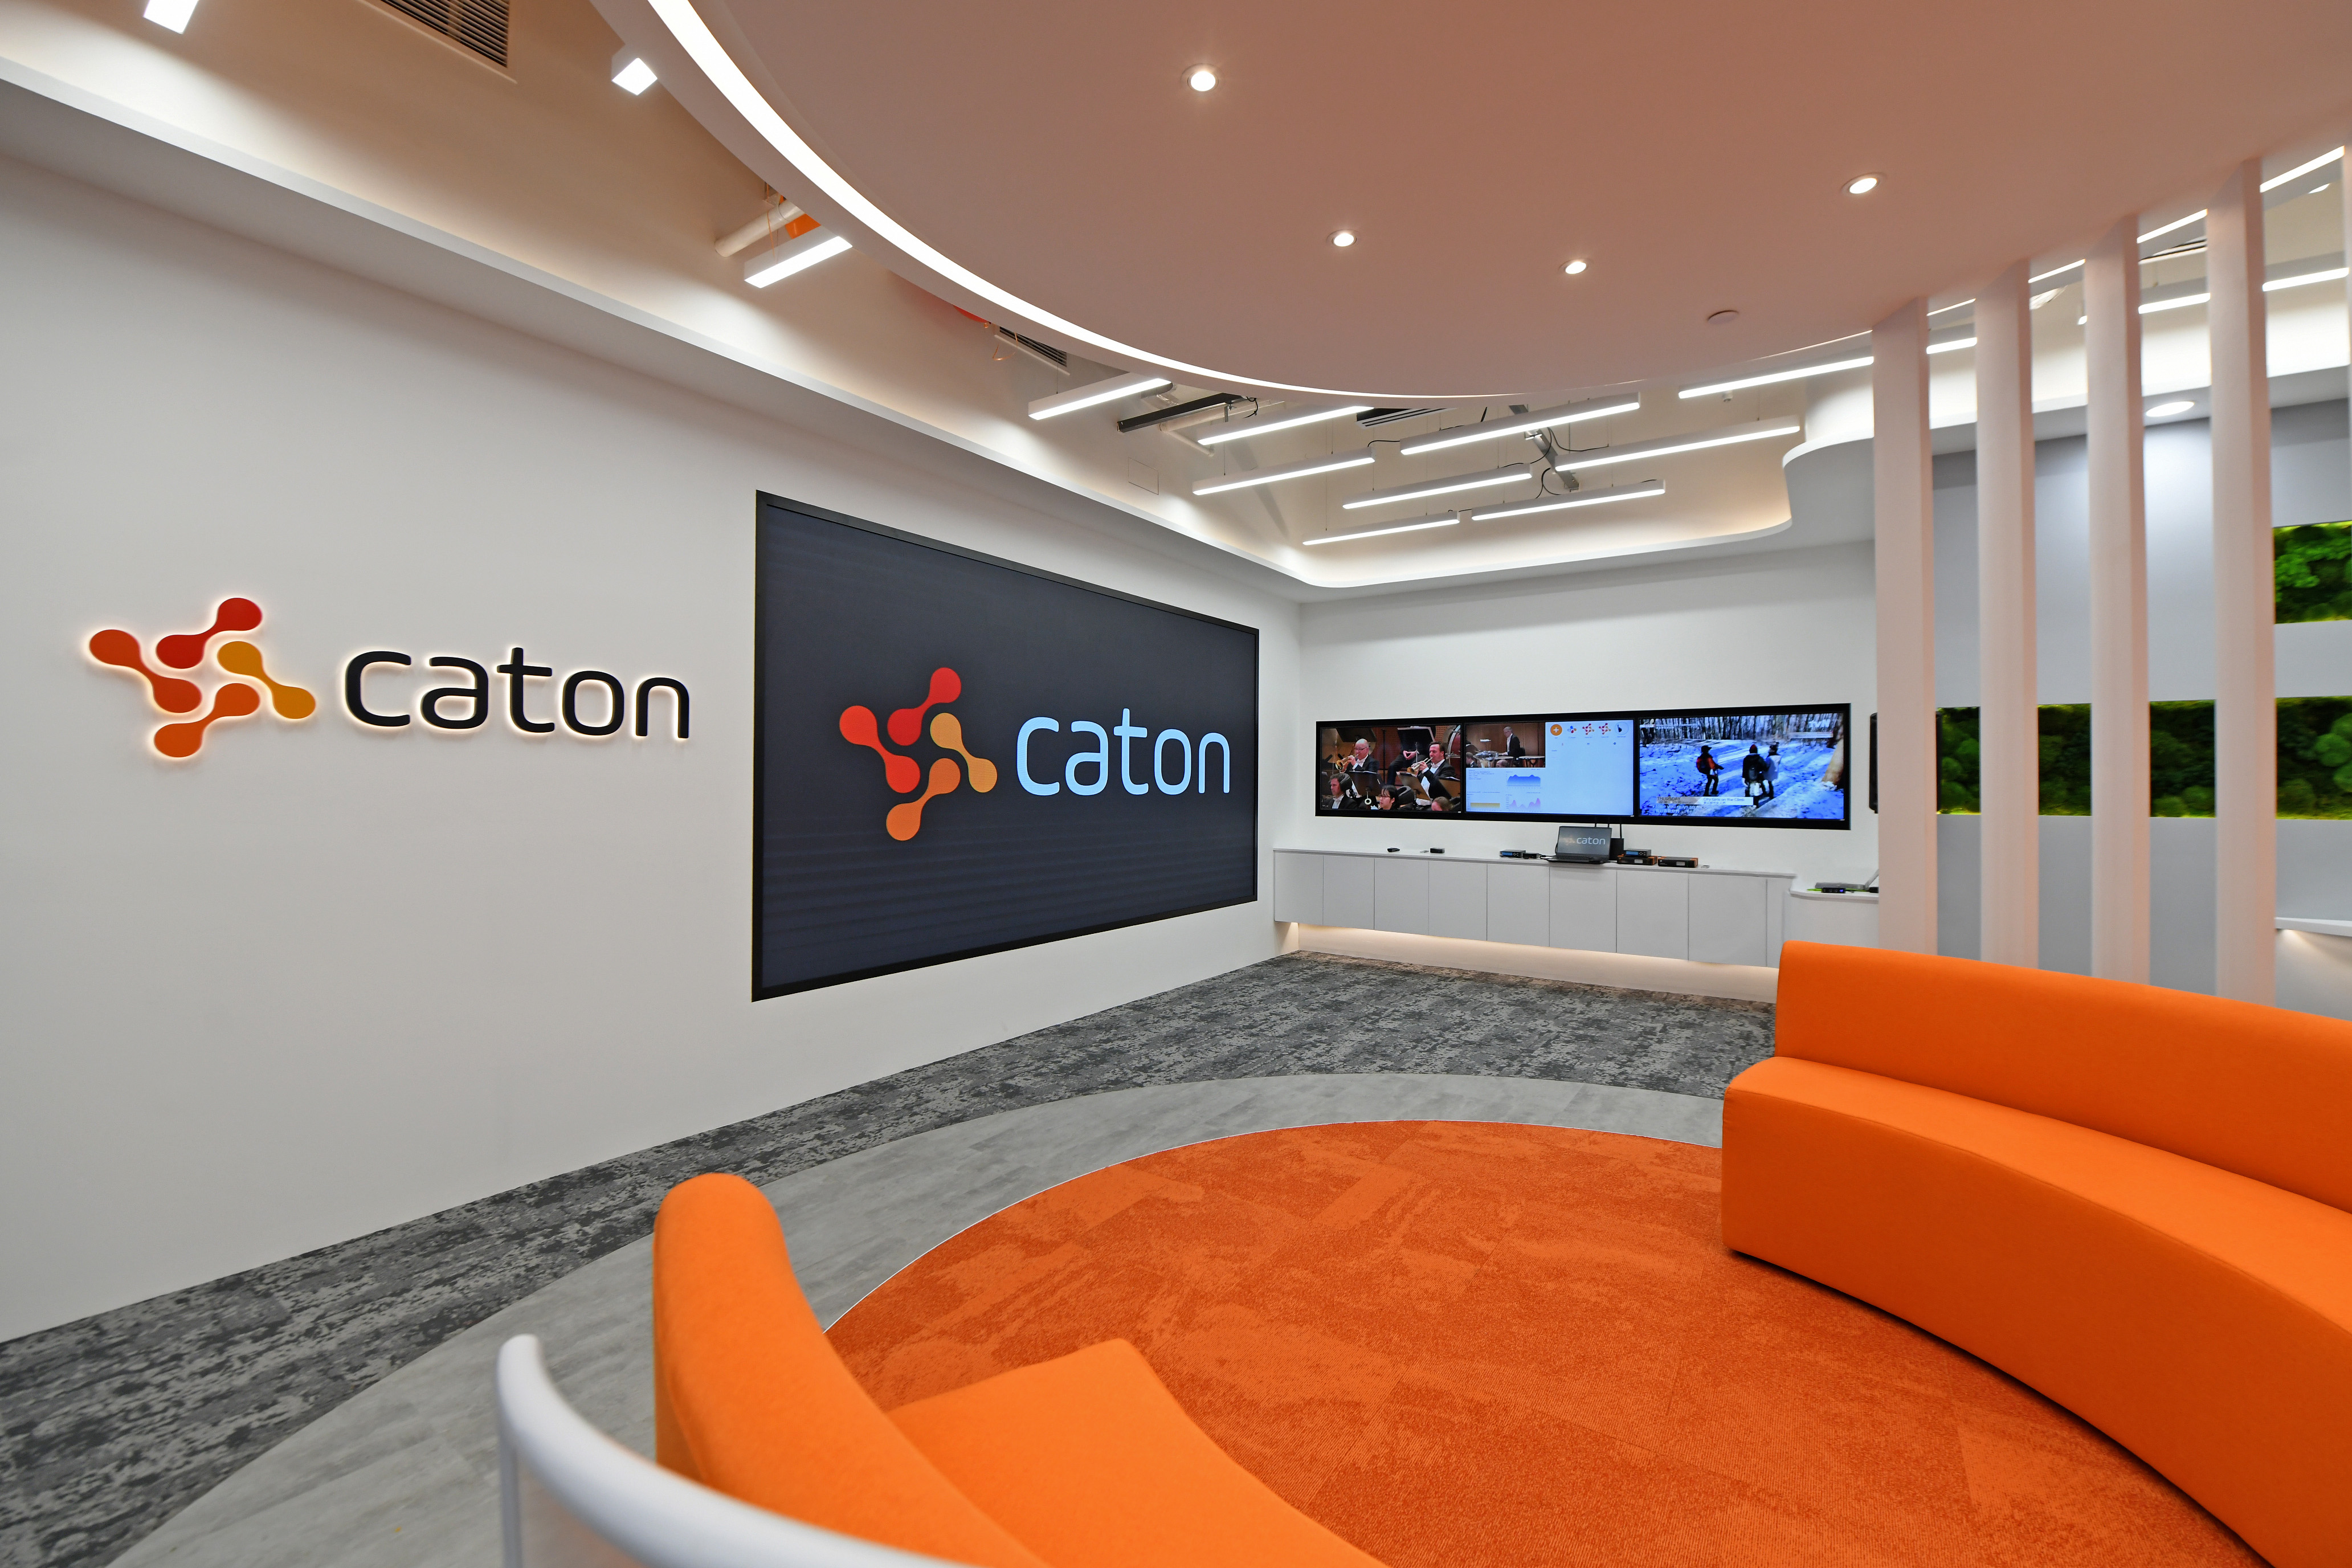 Caton drives for continuing business and technology growth by moving headquarters to Singapore